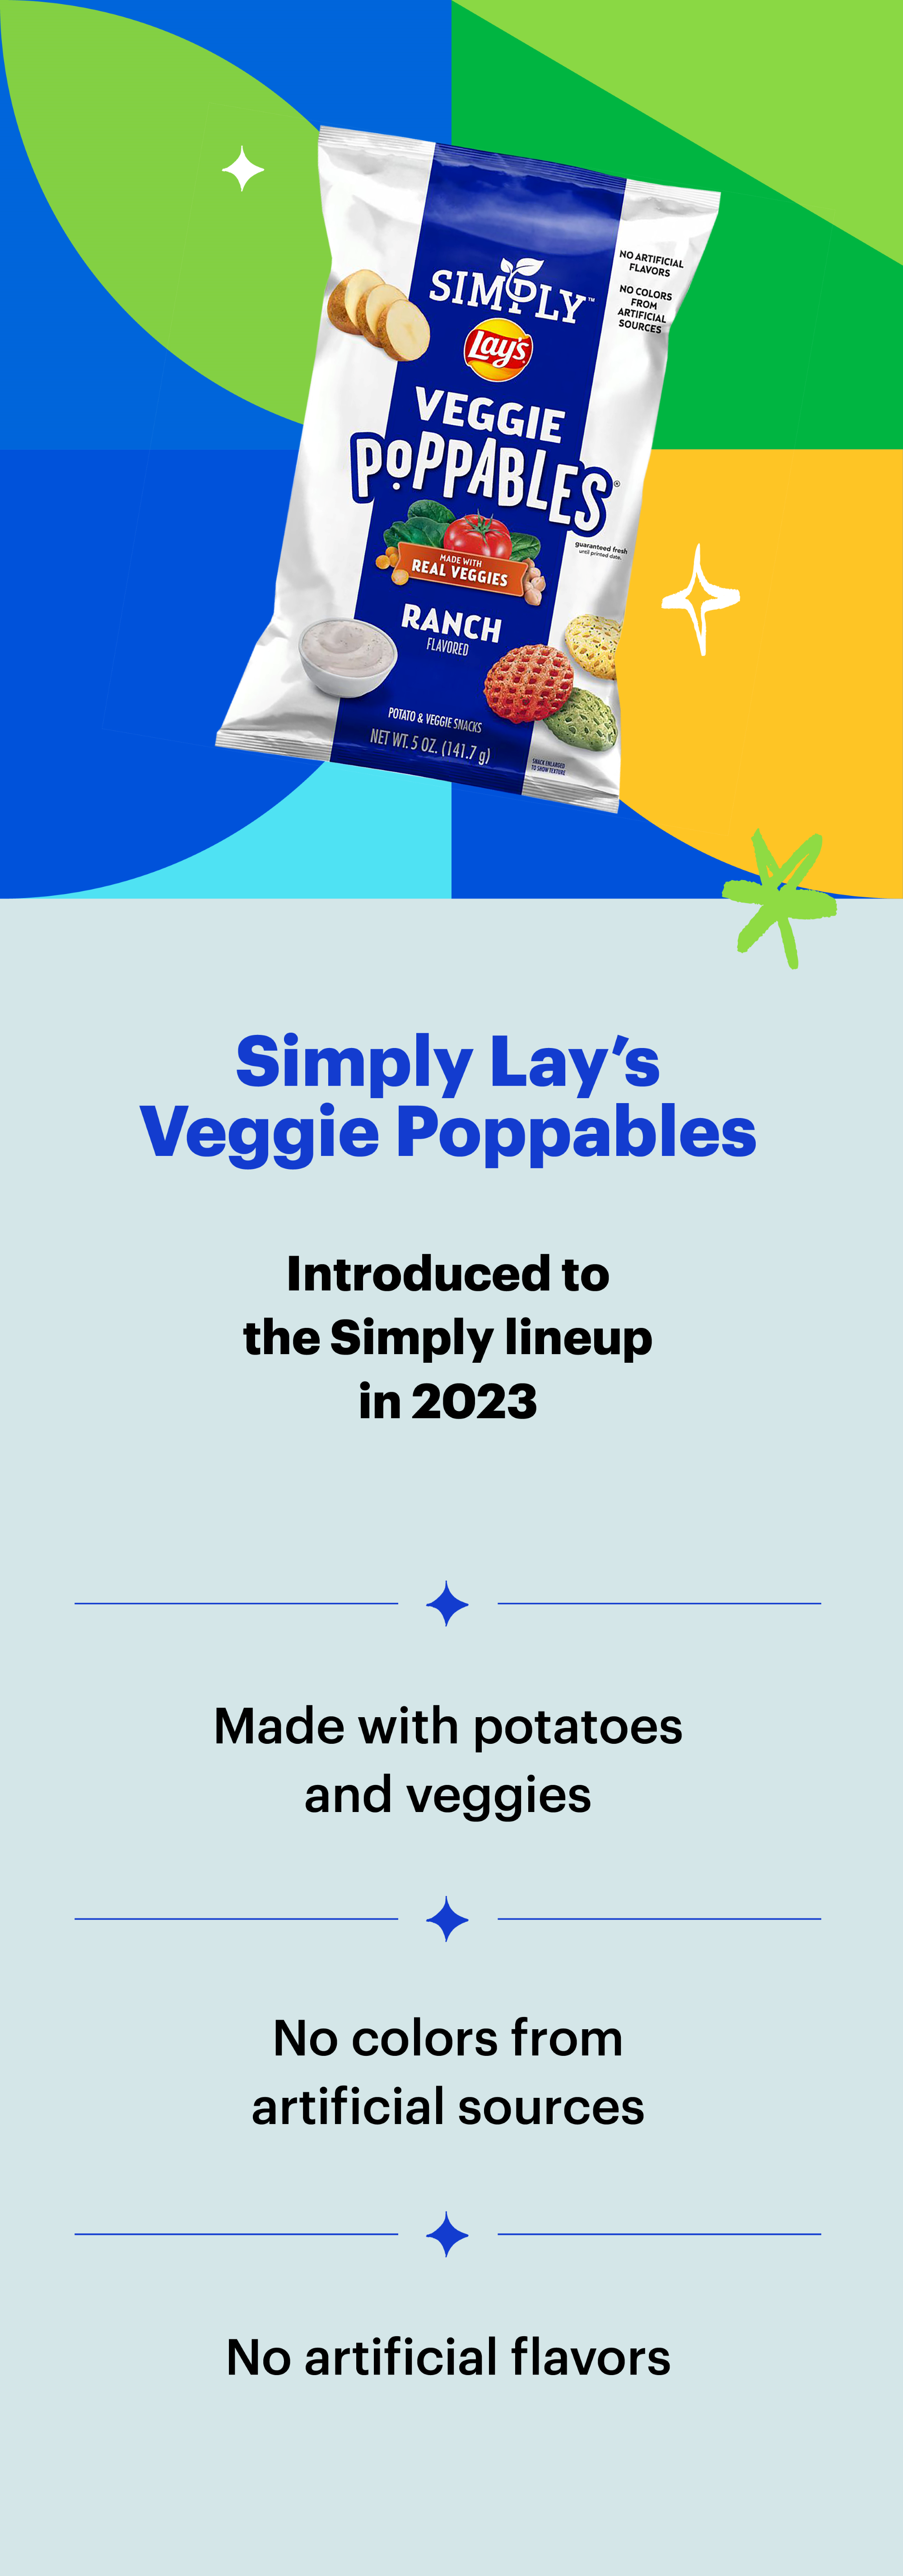 Simply Lay’s Veggie Poppables: Introduced to the Simply lineup in 2023. Made with potatoes and veggies. No colors from artificial sources. No artificial flavors.